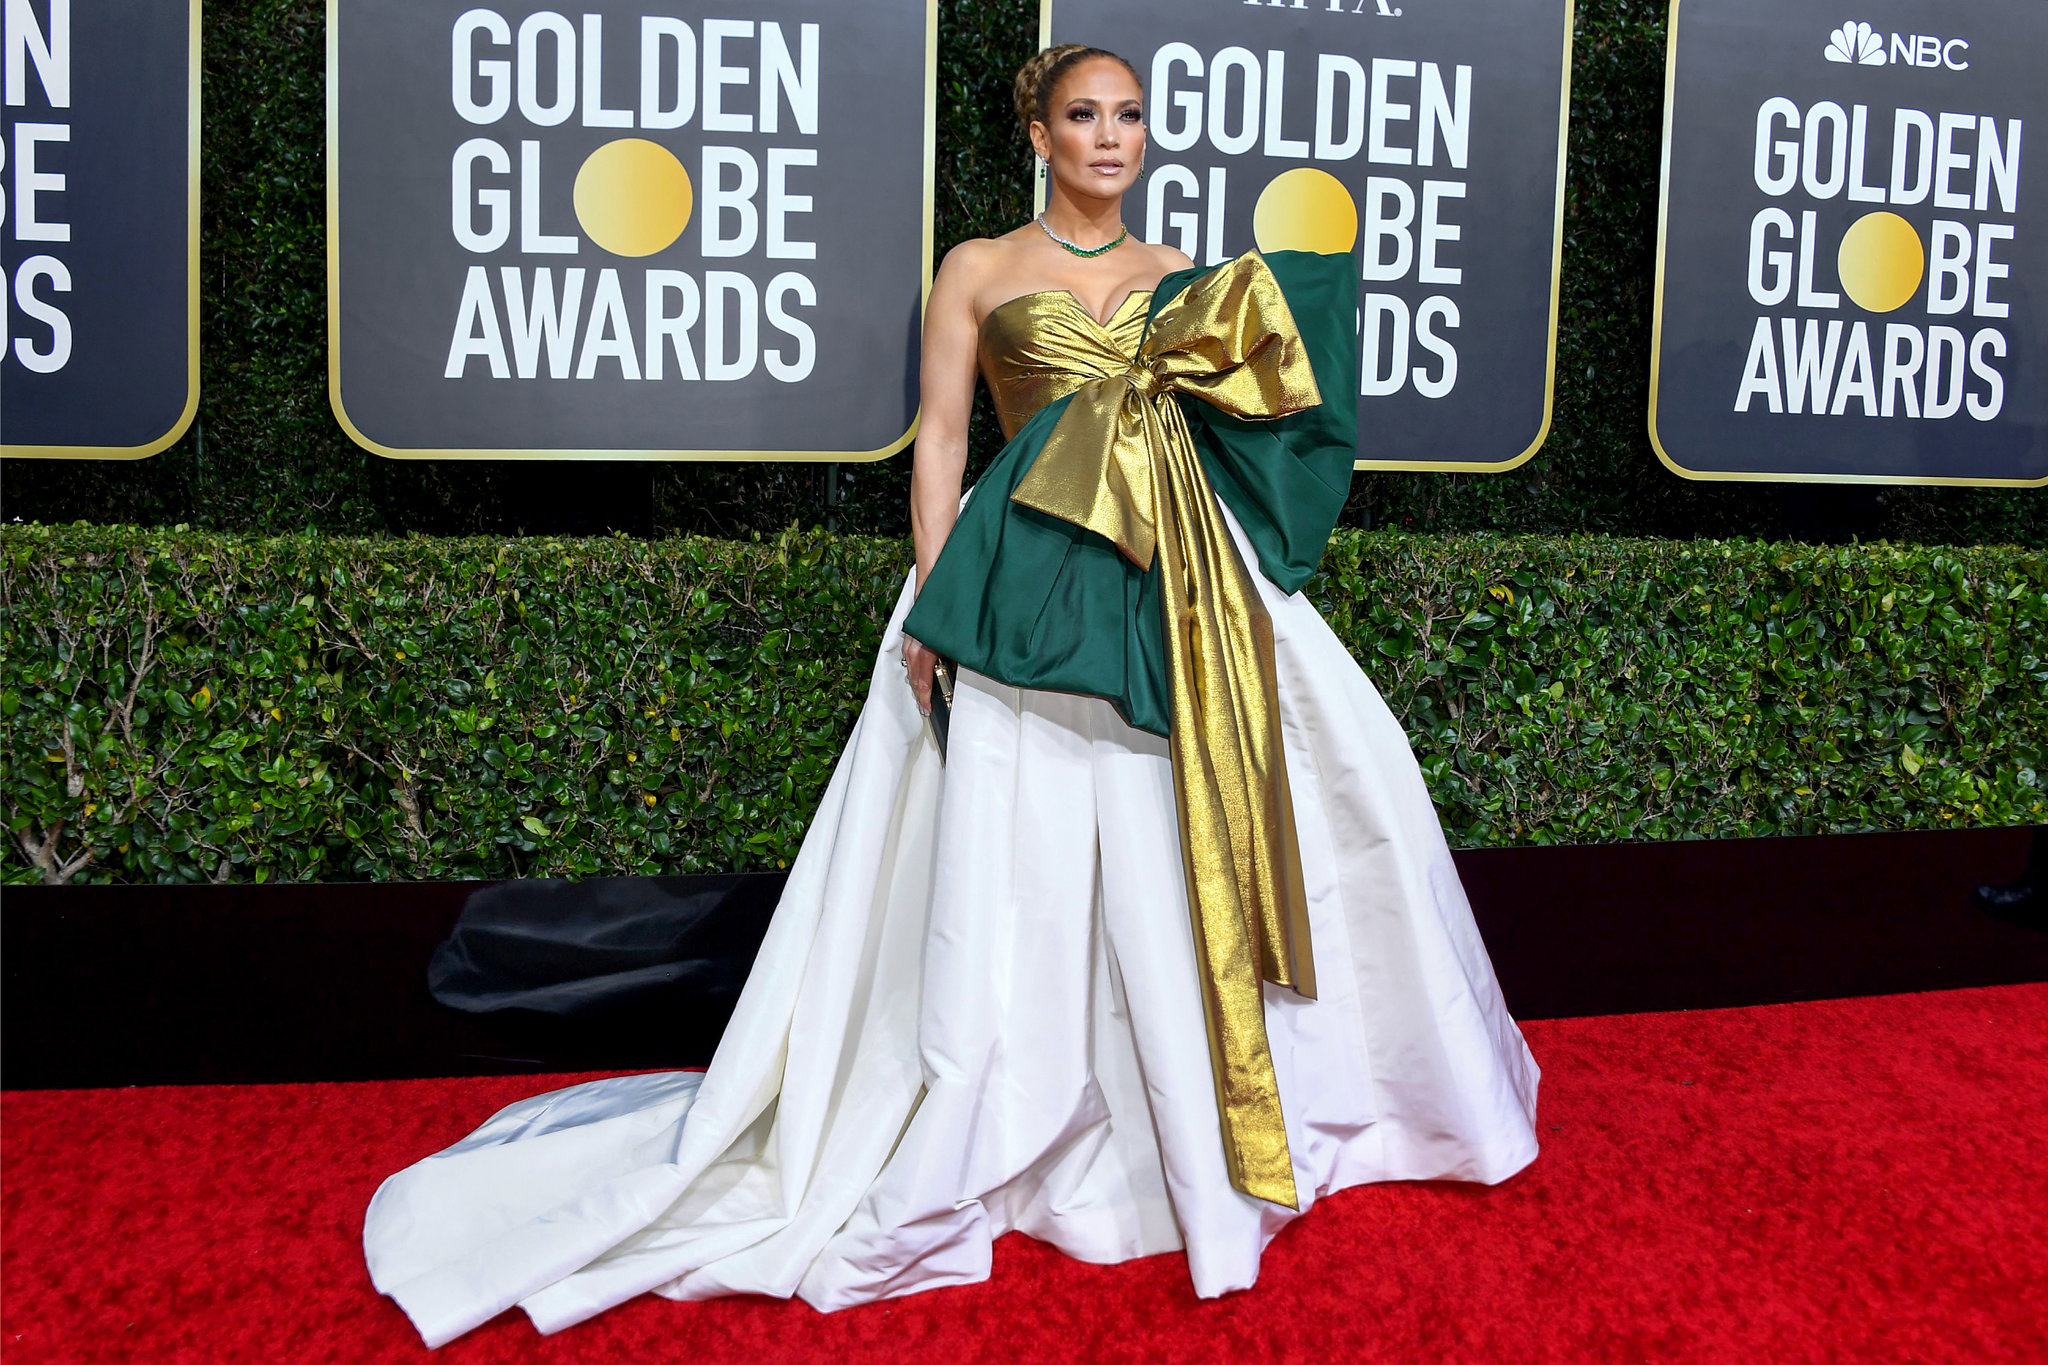 THE 2020 GOLDEN GLOBES BEST FASHION MOMENTS